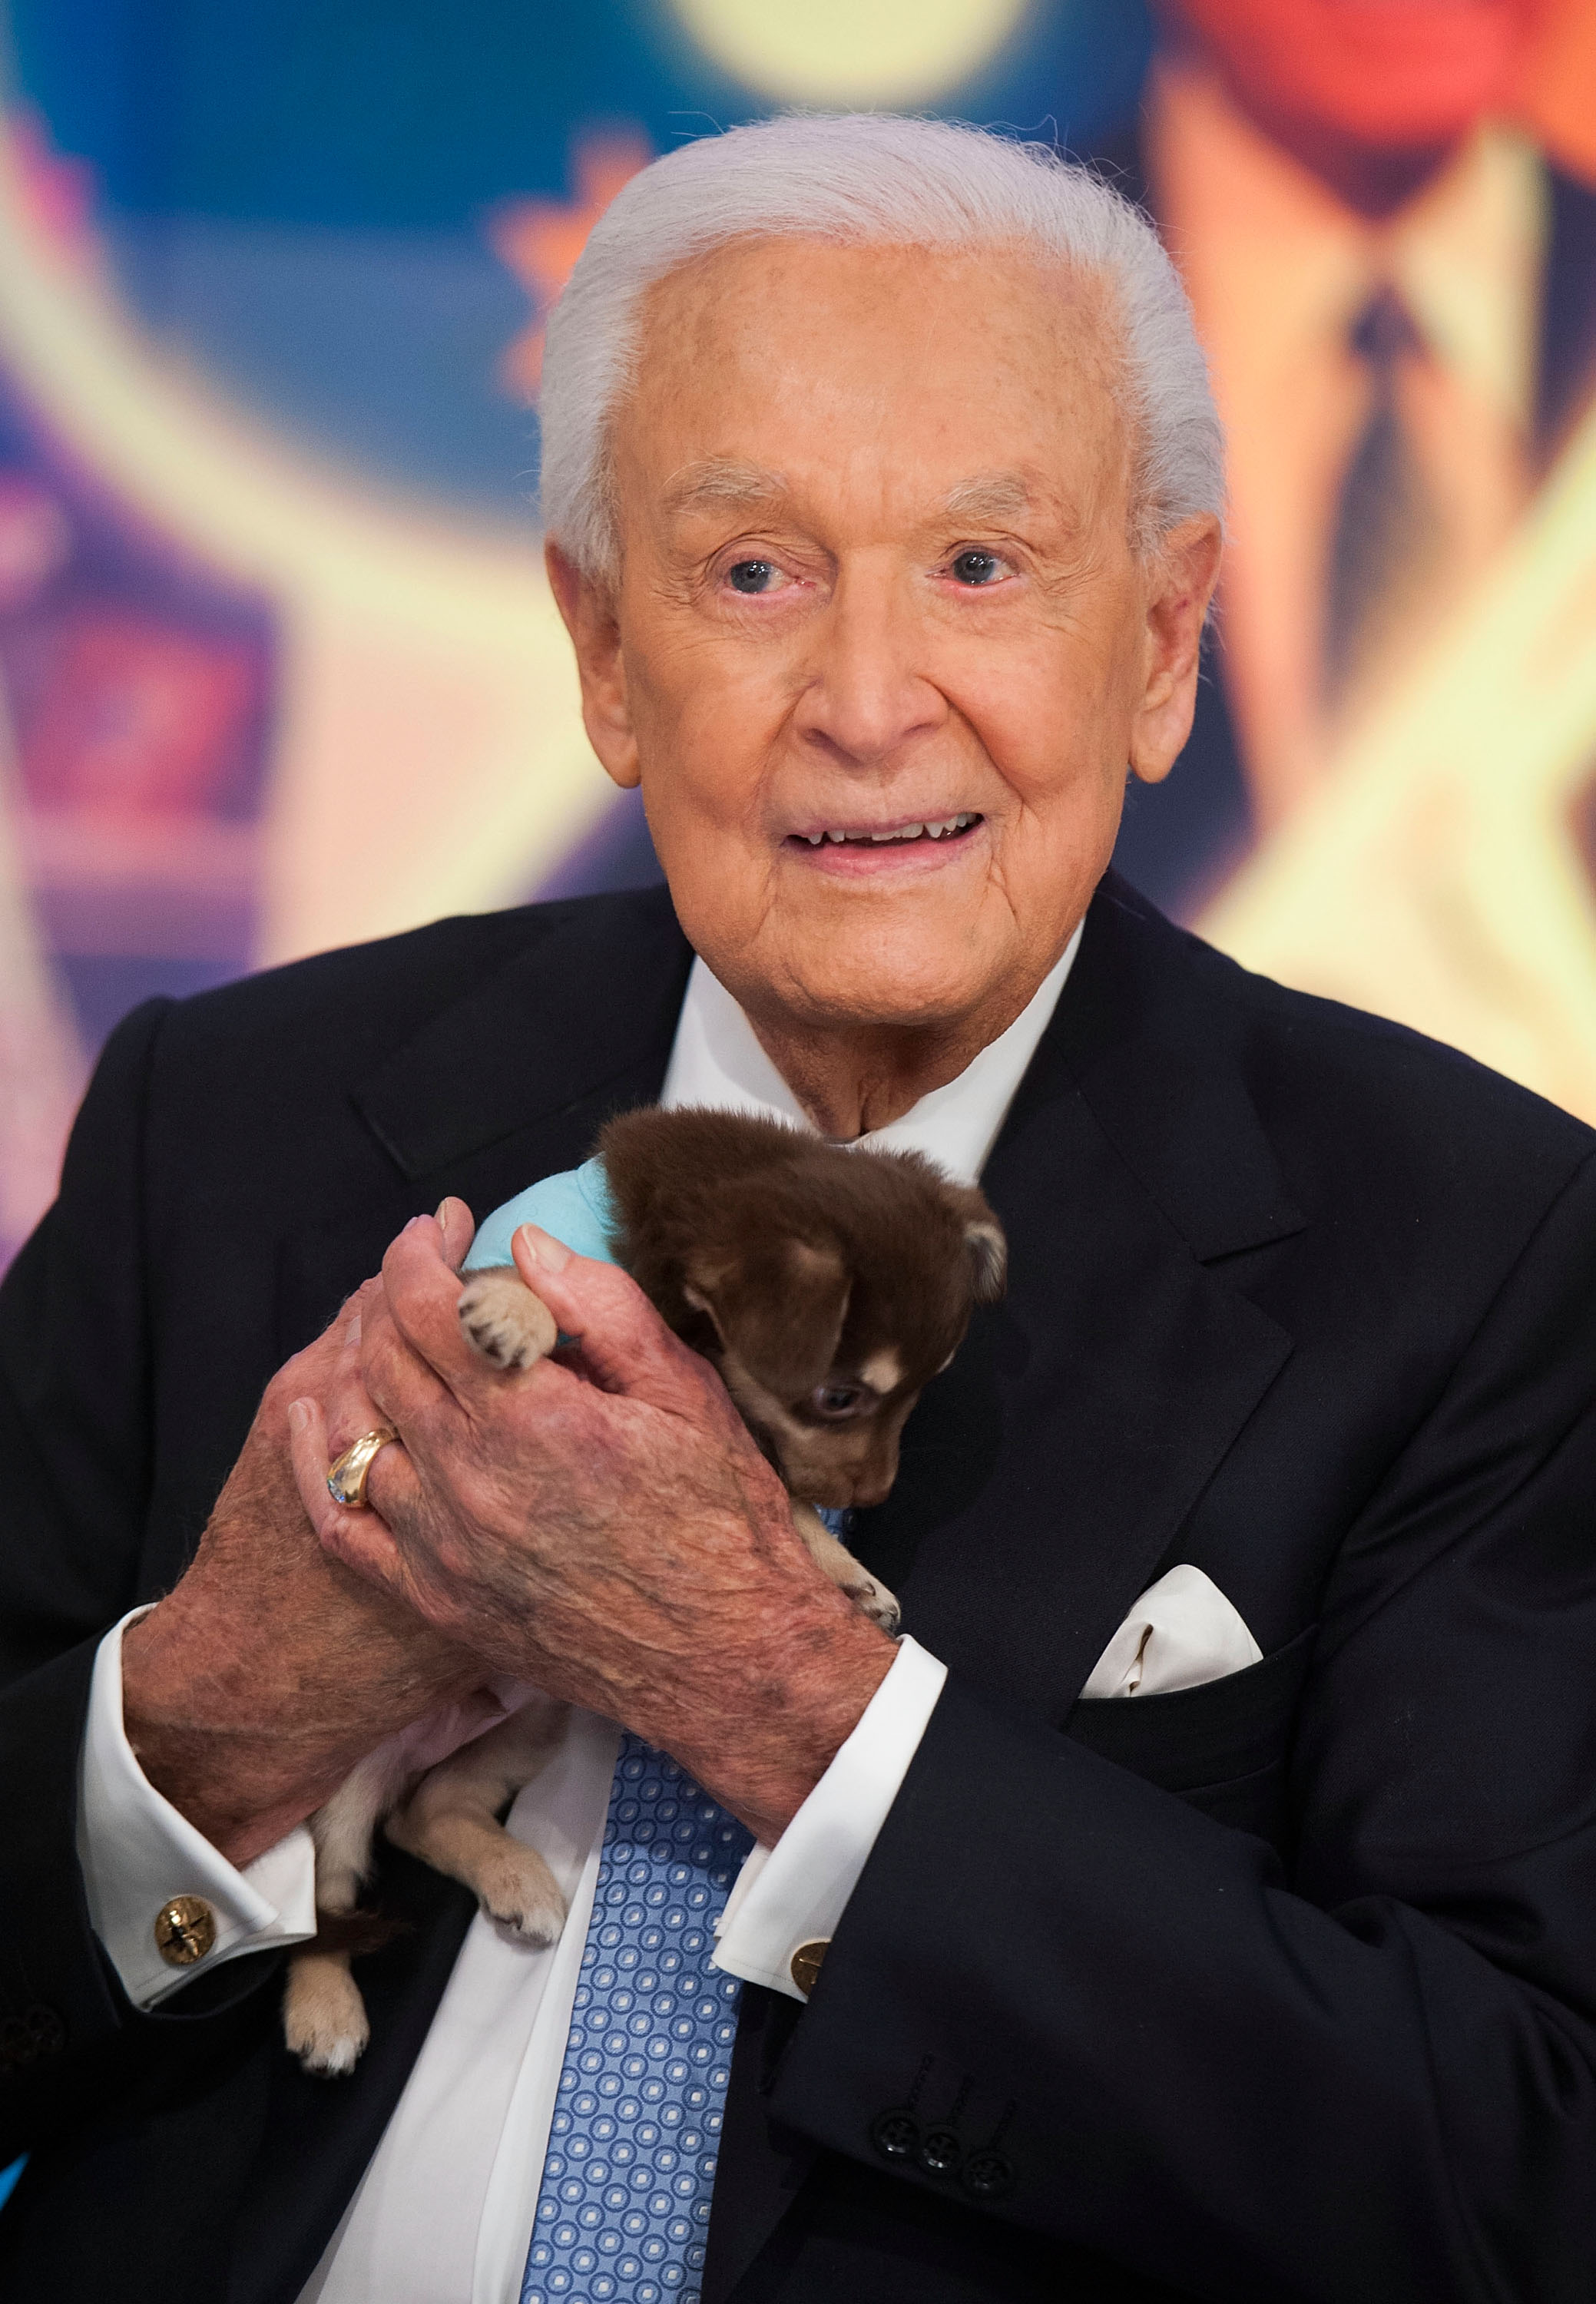 Bob Barker's 90th Birthday at CBS Television City on November 5, 2013, in Los Angeles, California. | Source: Getty Images